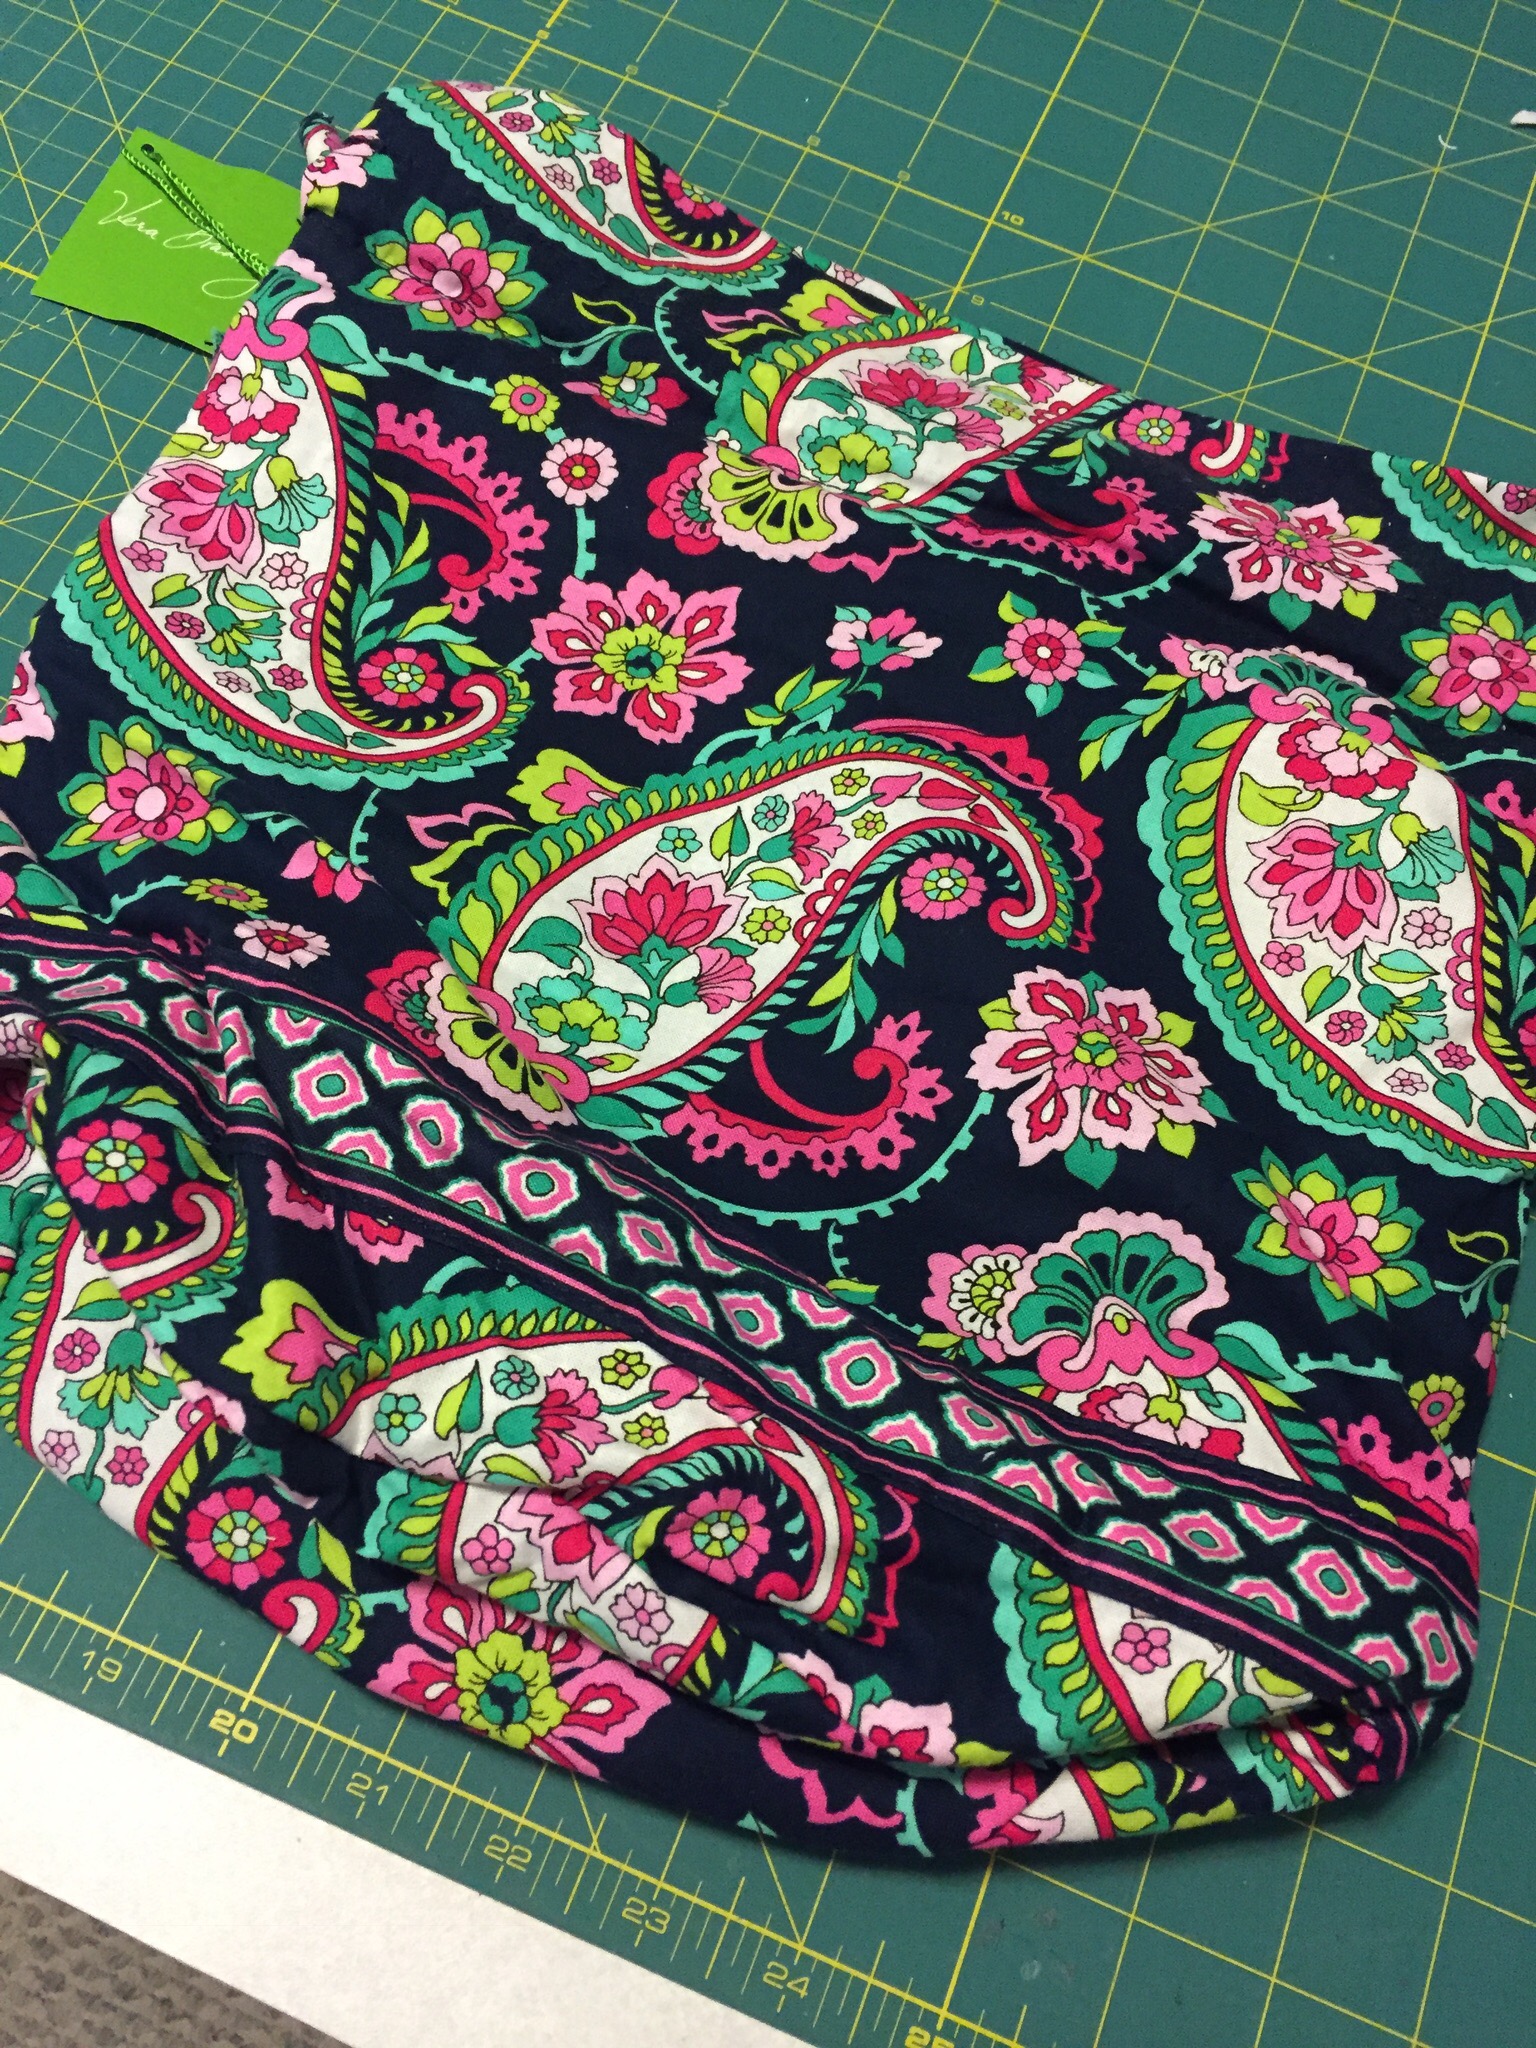 Use a pdf sewing pattern like Bloomer Buddies from Oh Sew Kat! to turn a Vera Bradley Tote Bag into an 18 inch Doll Dress. Lots of styles available.